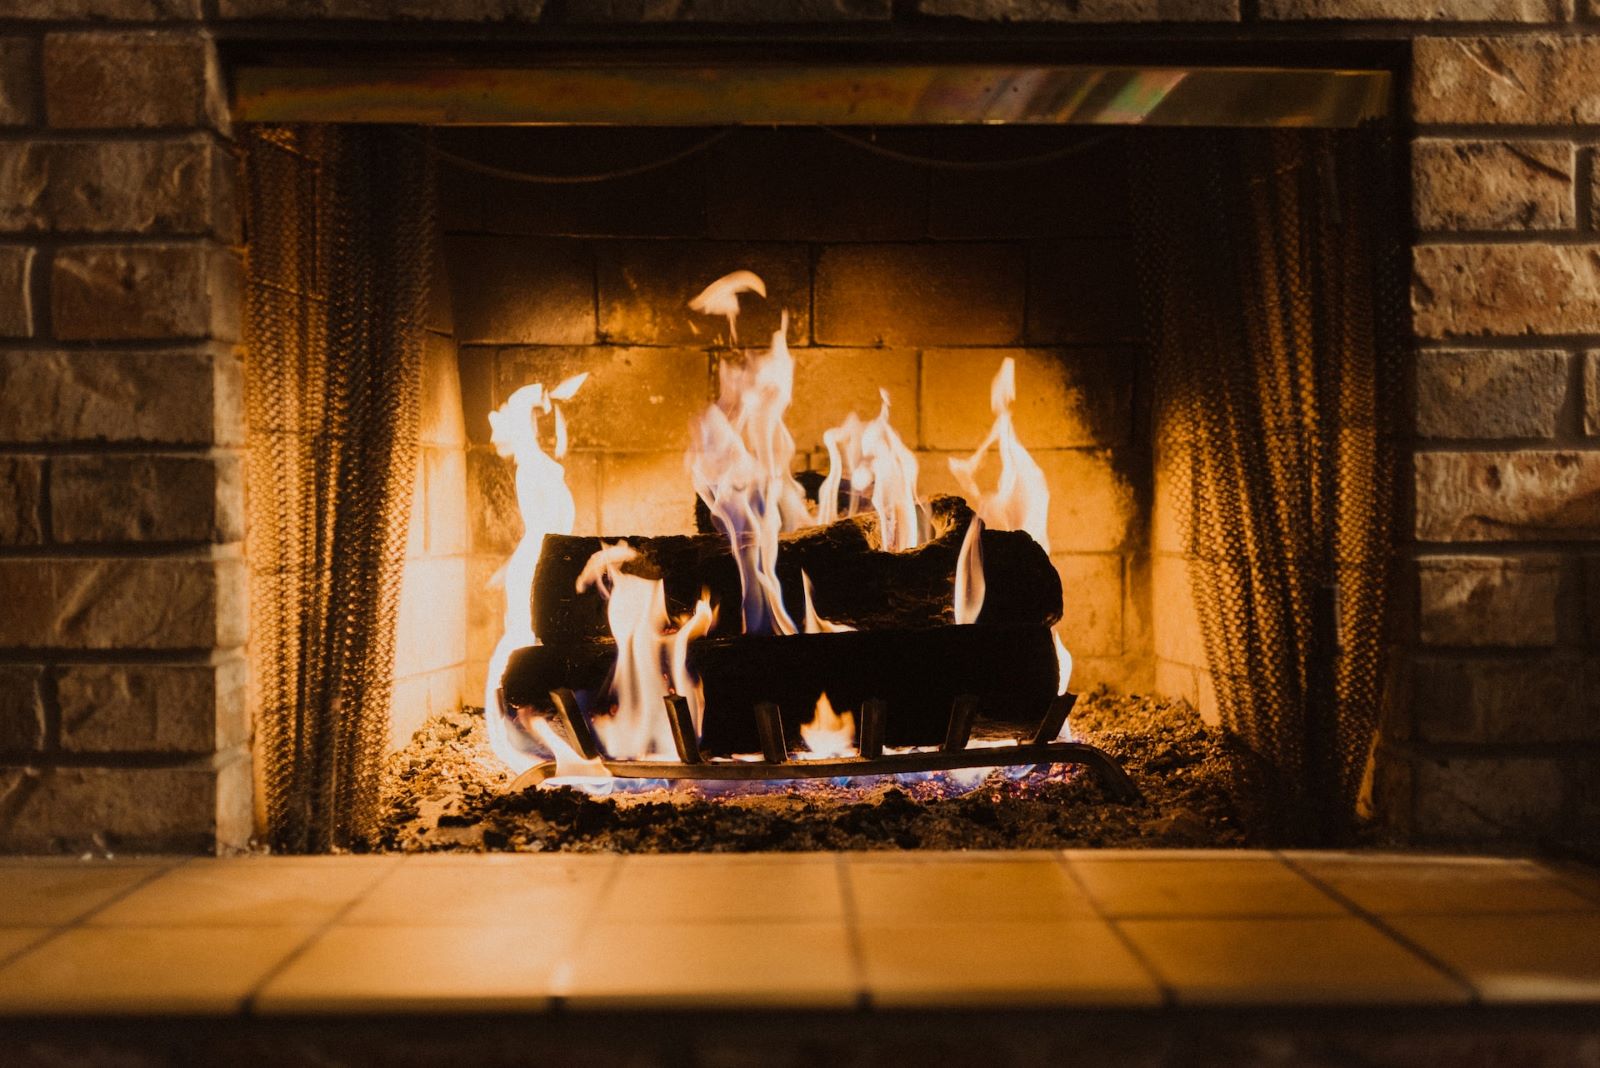 How To Make A Fire In Fireplace